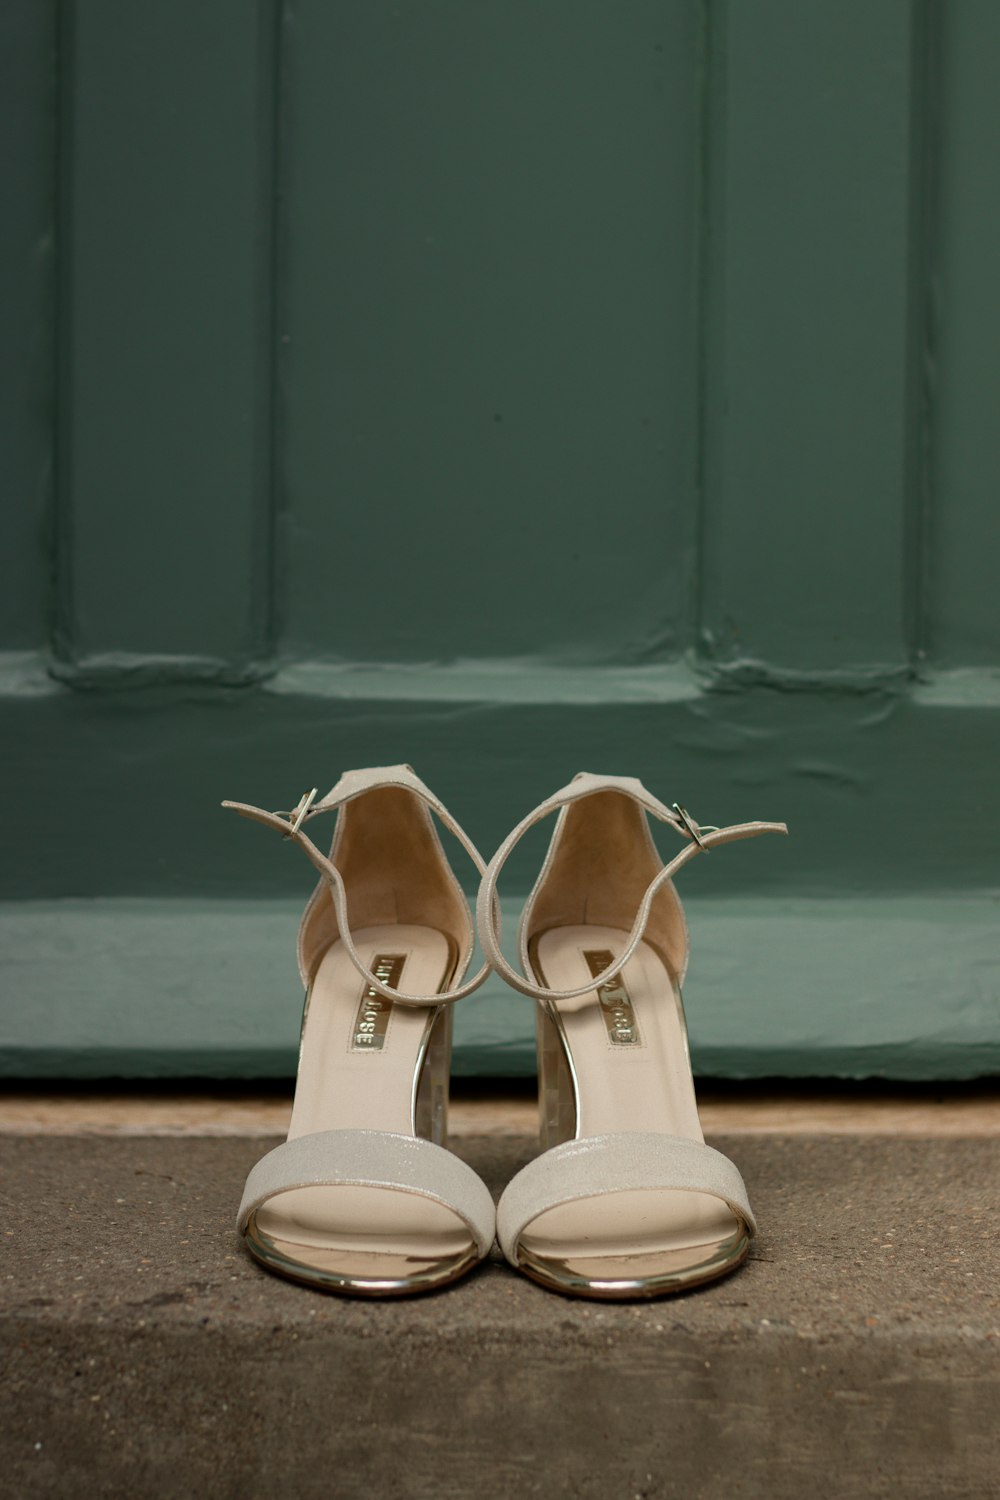 a pair of white high heeled shoes sitting on the ground